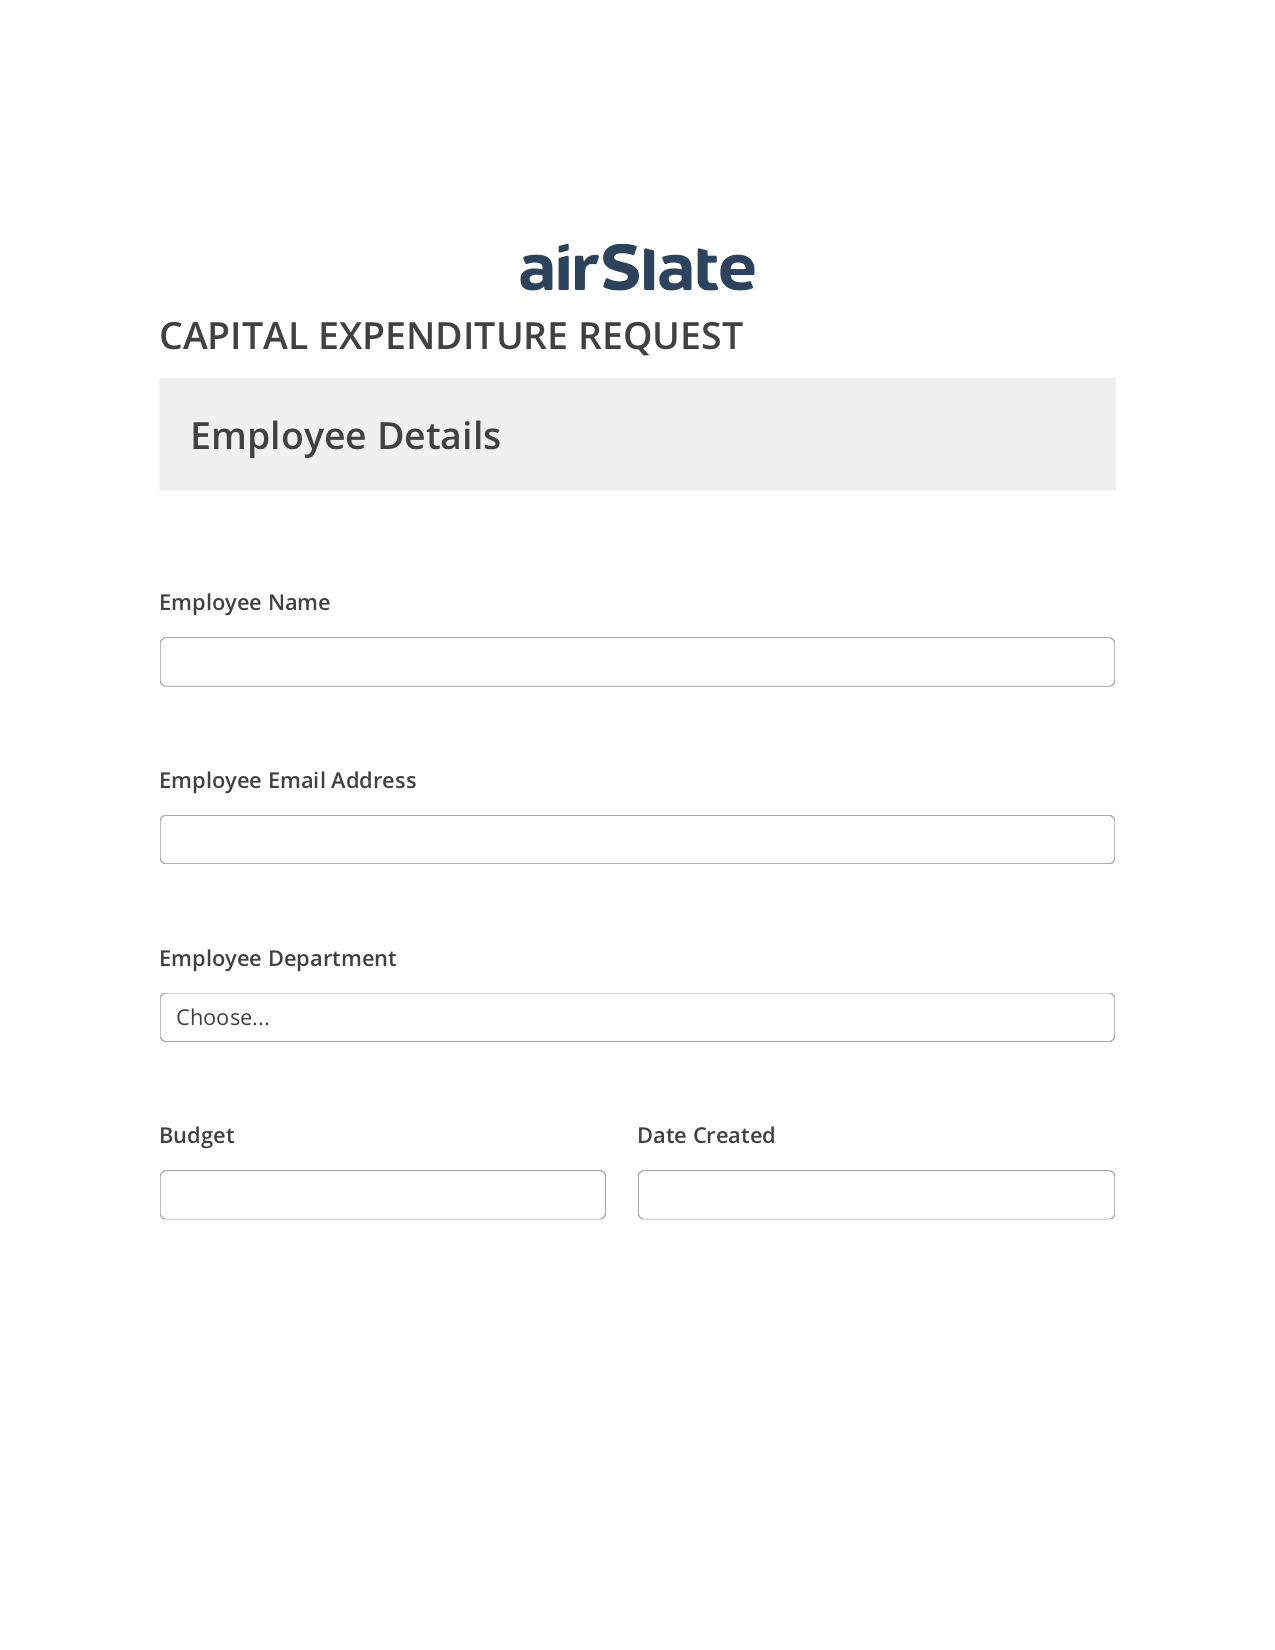 Capital Expenditure Request Approval Workflow Pre-fill from Smartsheet Bot, Create Slate Reminder Bot, Export to Excel 365 Bot